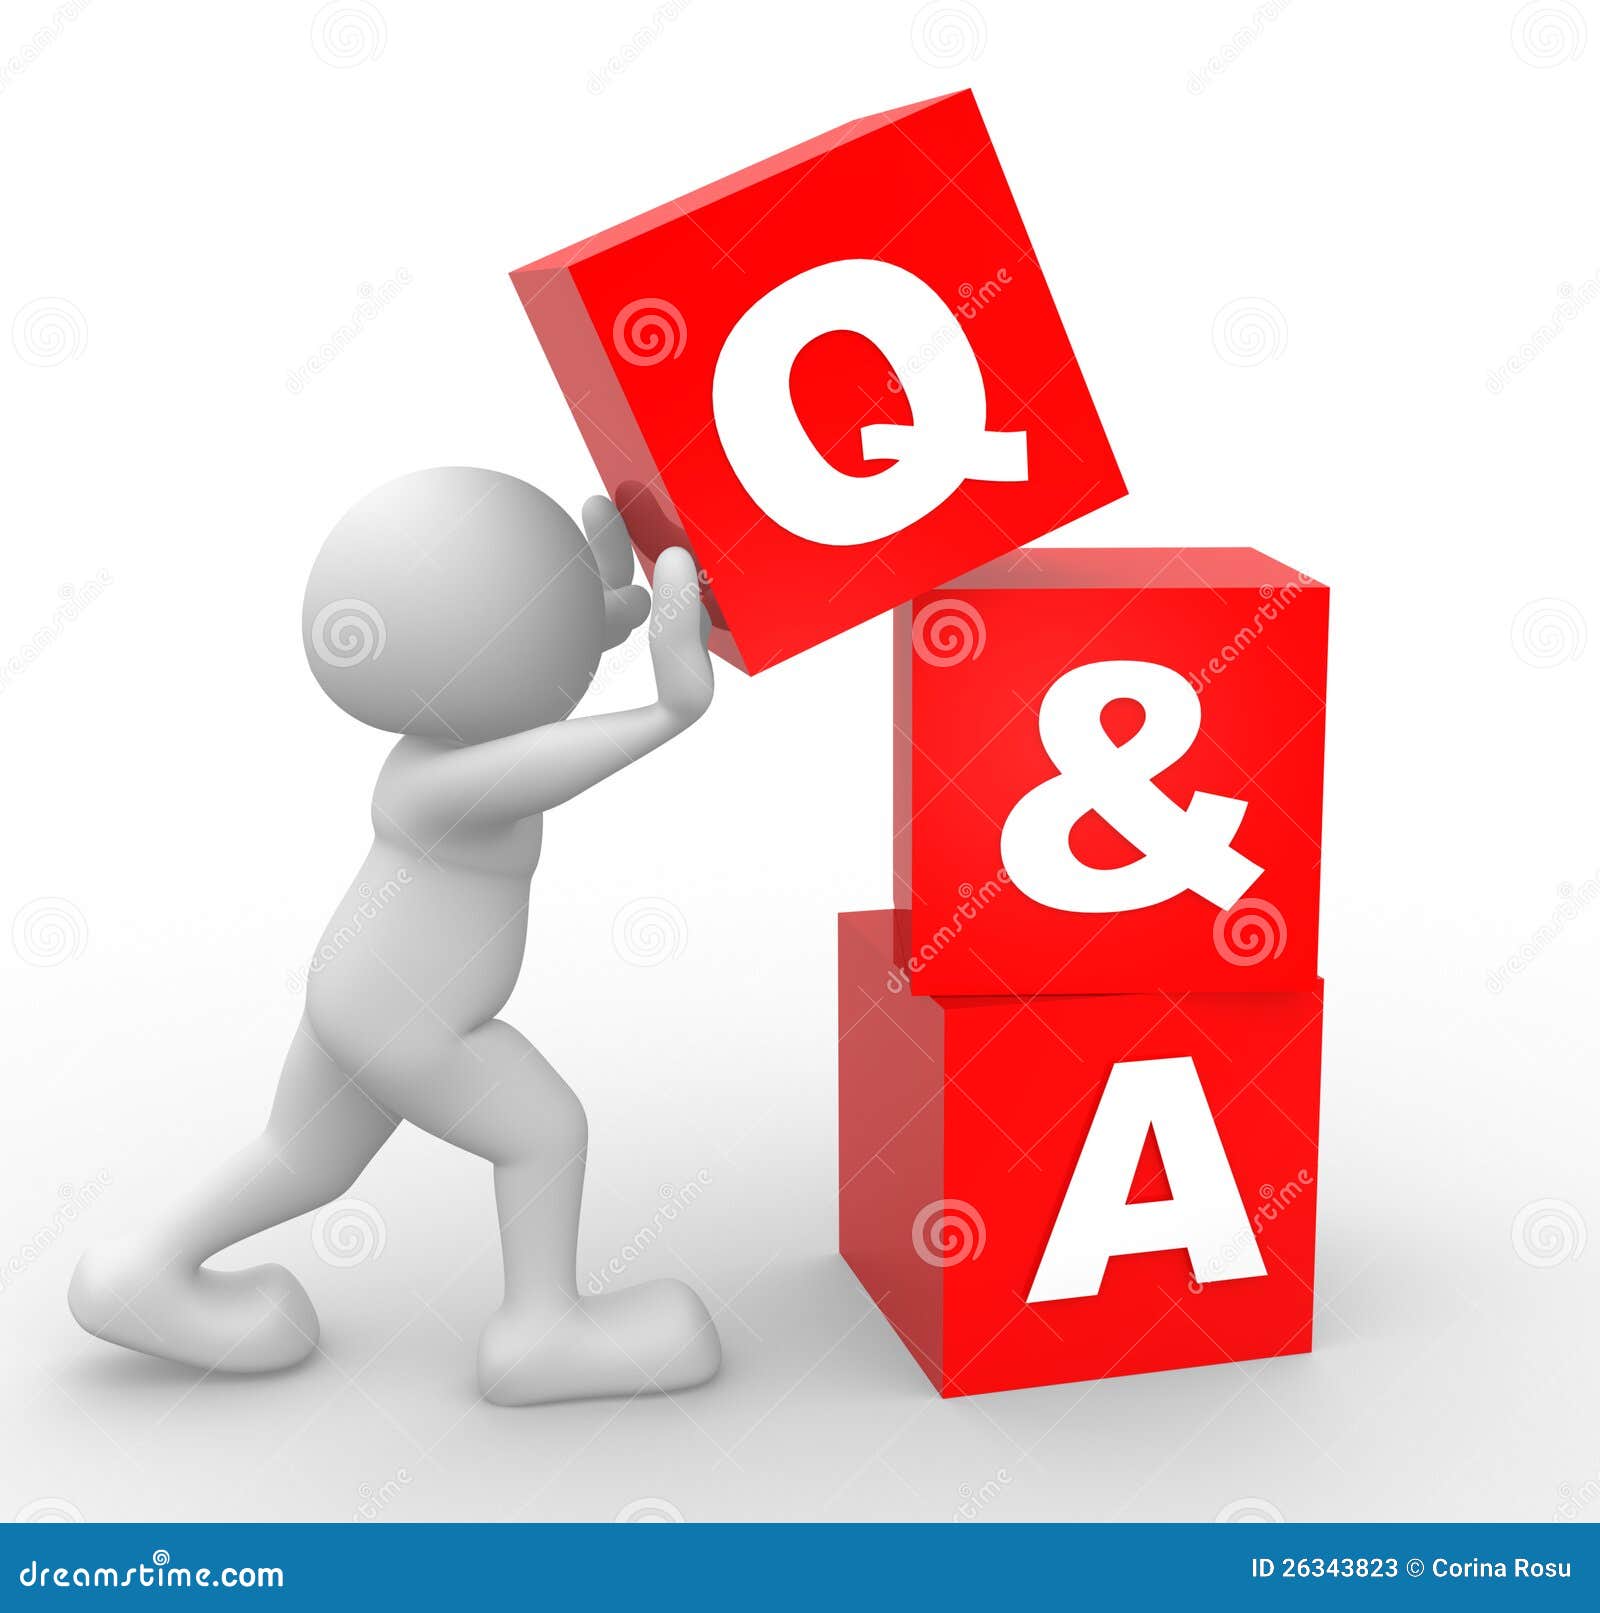 questions and answers icon clipart - photo #9